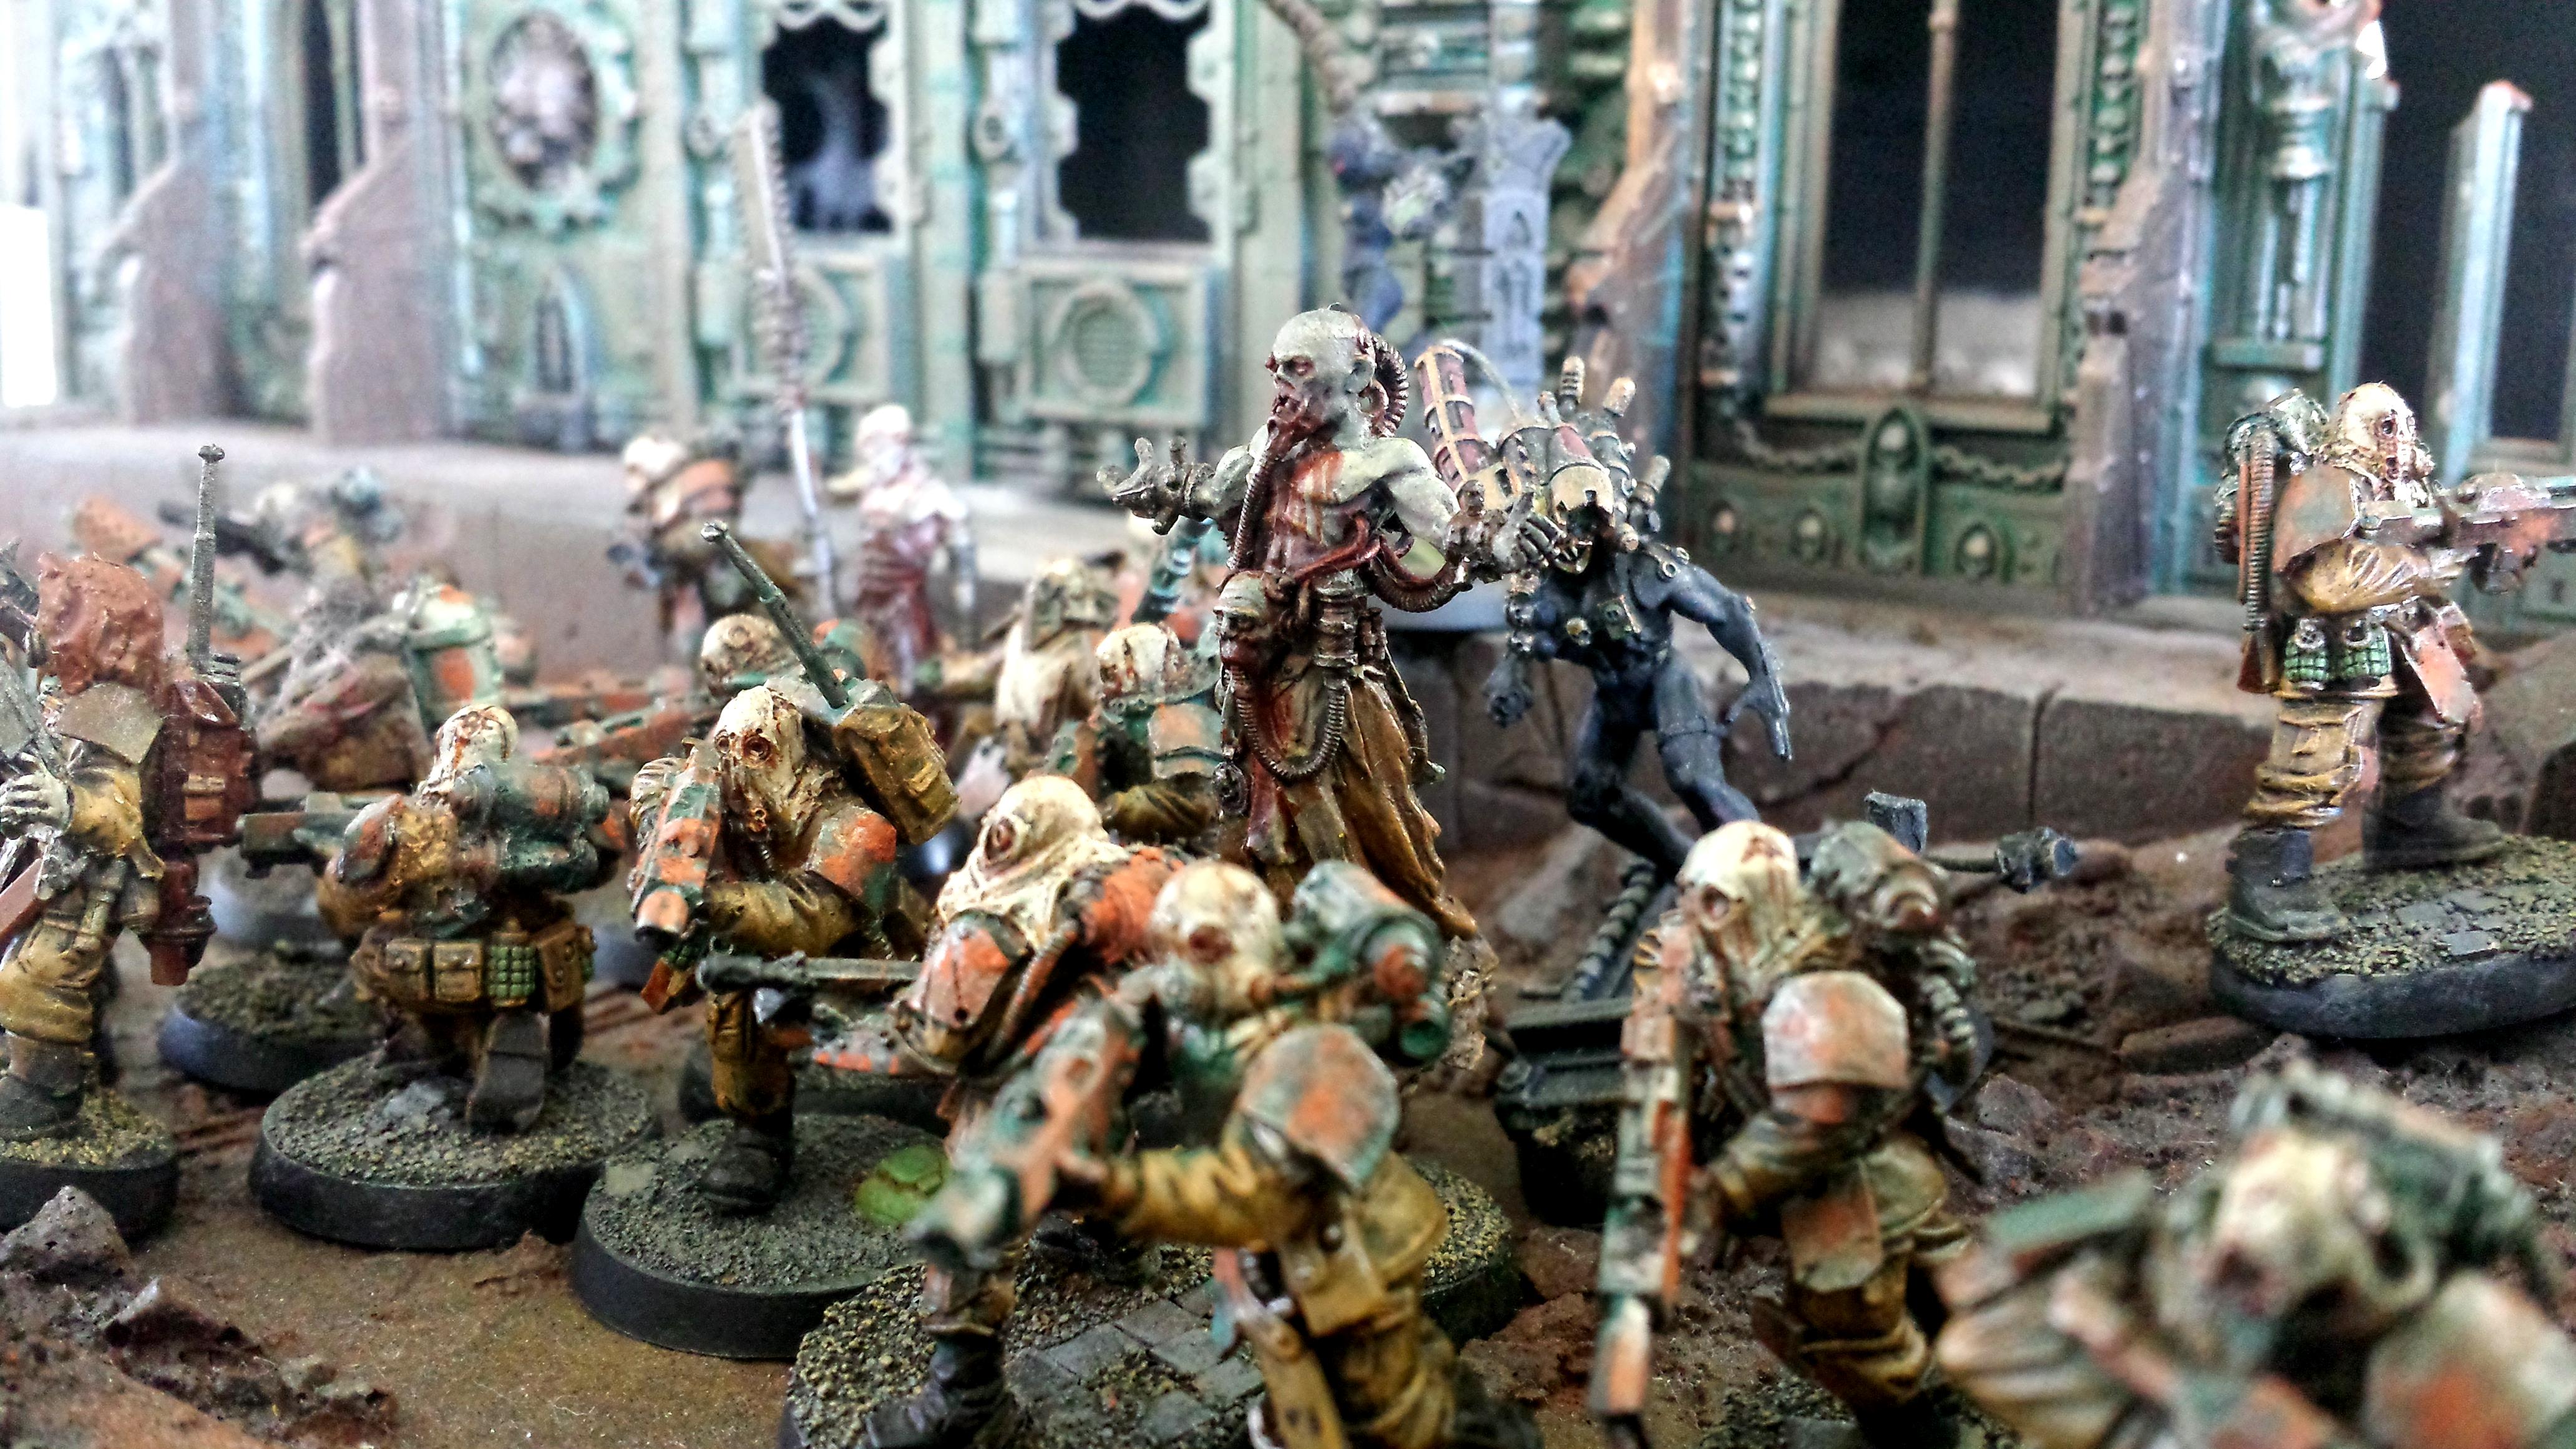 Apostles Of Contagion, Assassins, Chaos, Forge World, Nurgle, Renegades, Warhammer 40,000